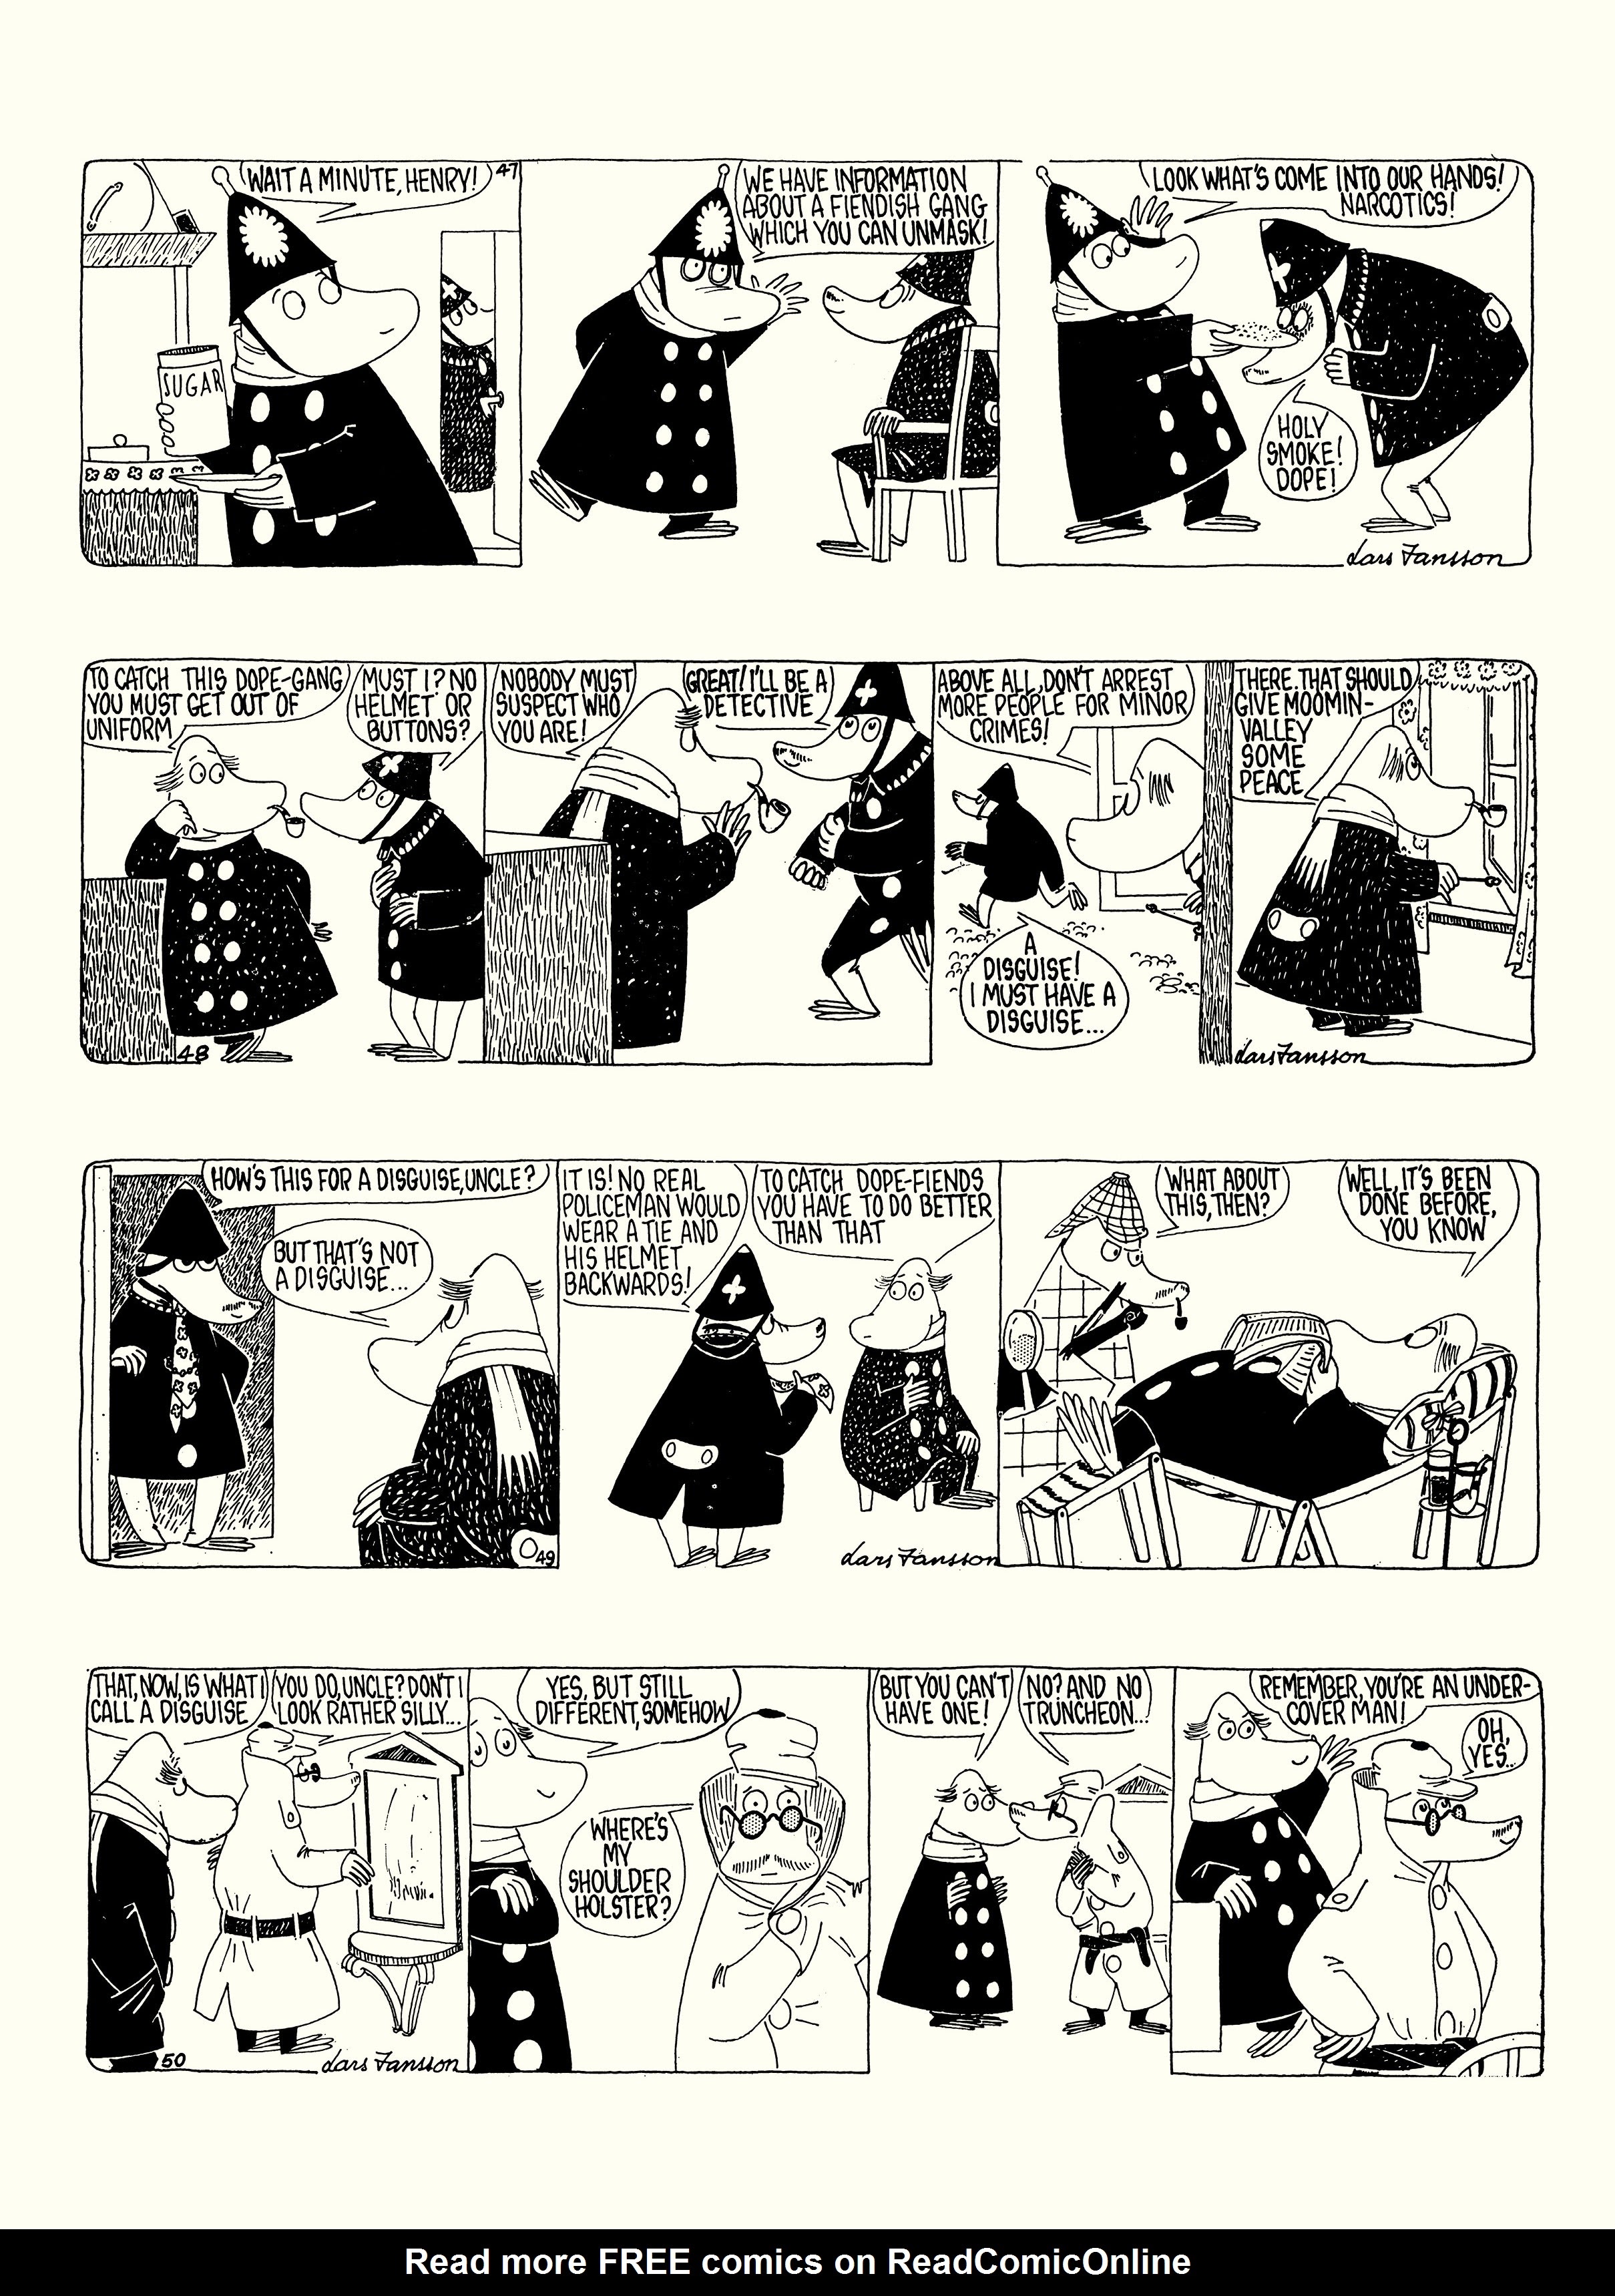 Read online Moomin: The Complete Lars Jansson Comic Strip comic -  Issue # TPB 8 - 83